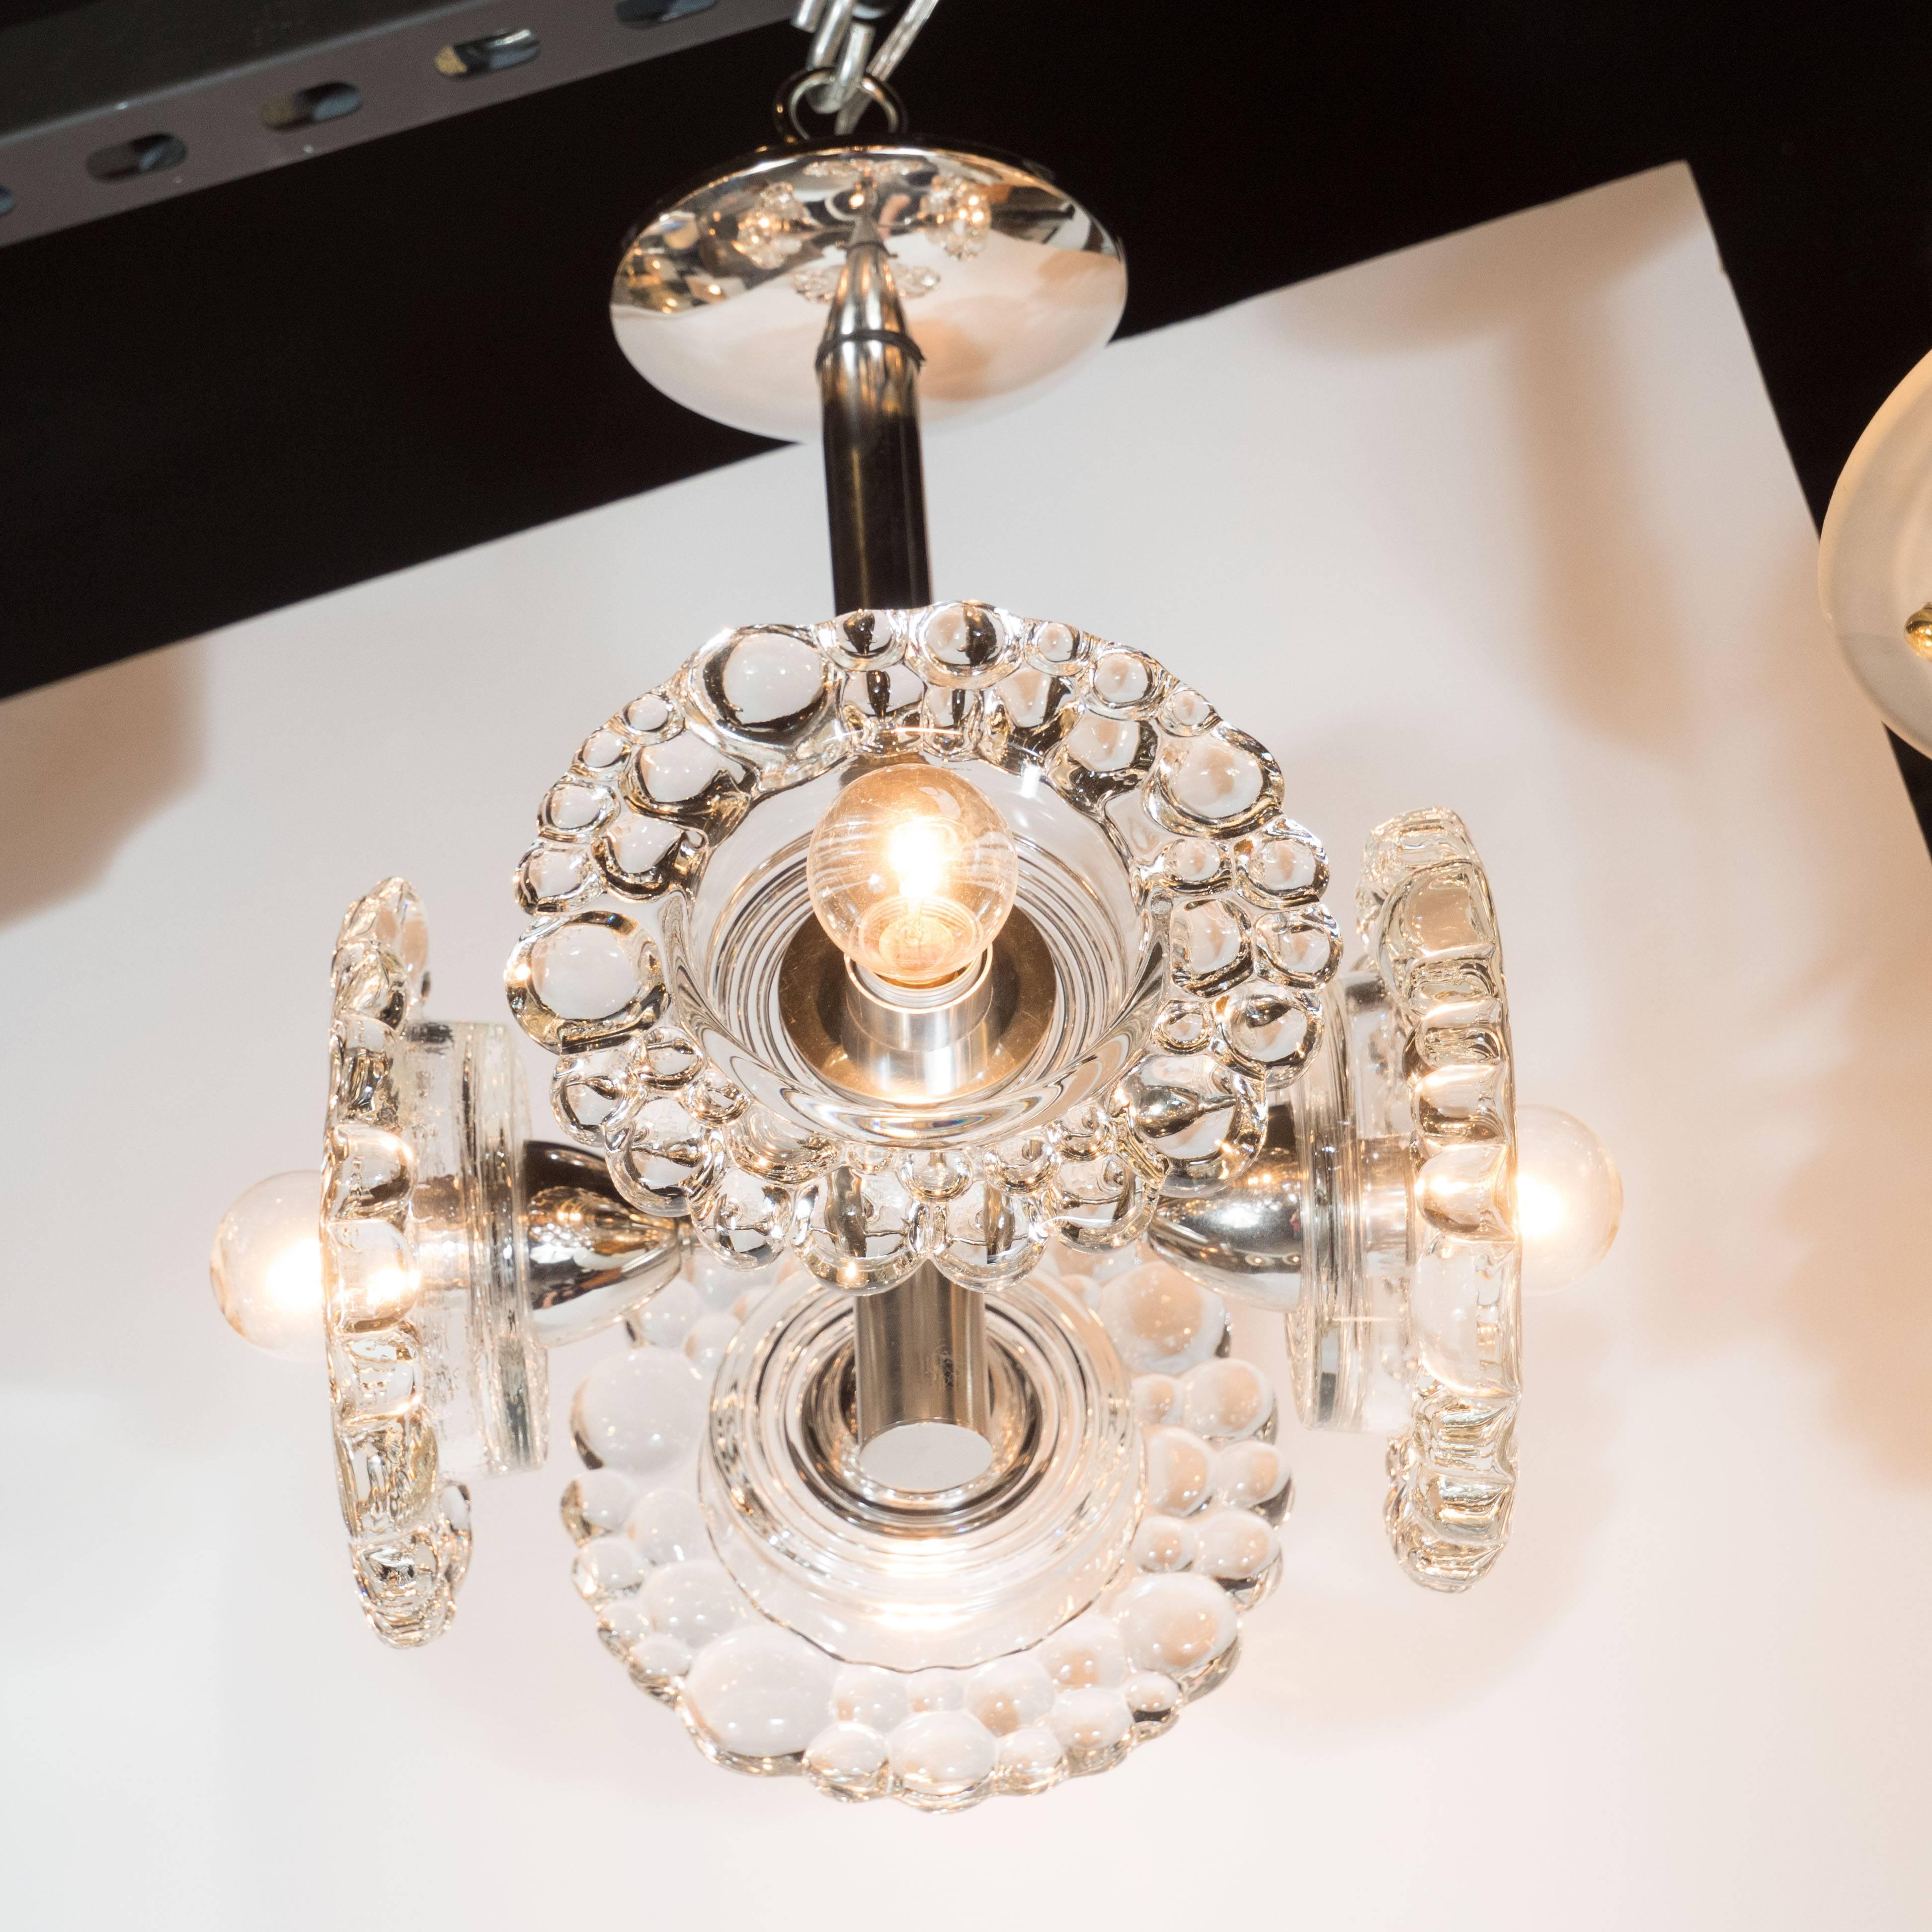 This sophisticated Mid-Century Modern chandelier was realized by the esteemed Austrian glass studio J.T. Kalmar, circa 1960. It features four straight cylindrical arms extending perpendicularly from a two-tiered cylindrical chrome body. The